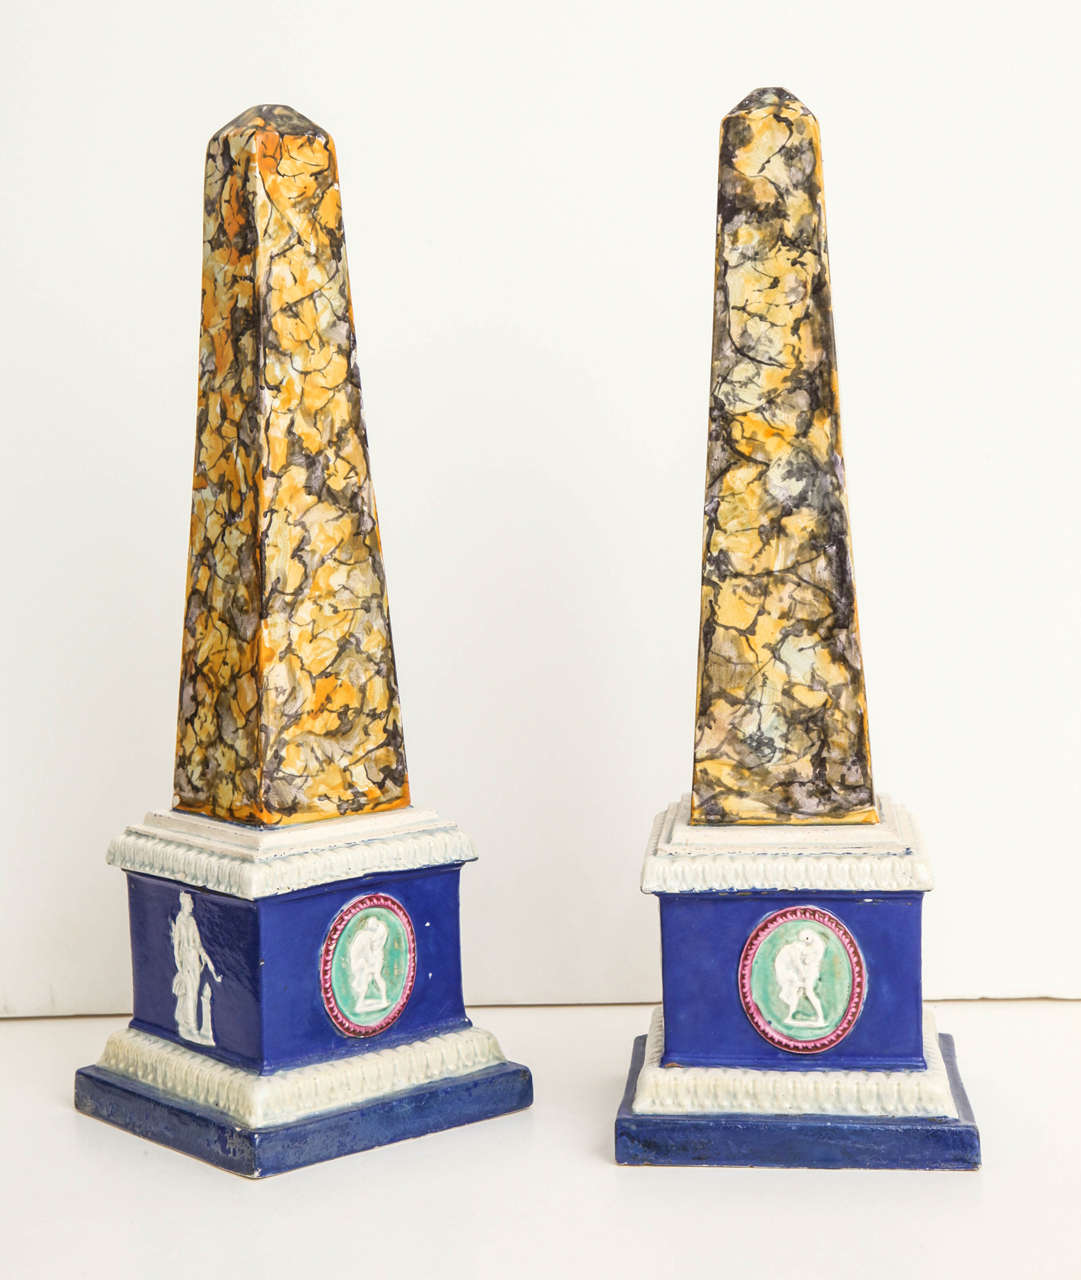 A pair of 19th century English pearlware obelisks with polychrome faux marbleized decoration, the bases decorated with neoclassical figures in relief.